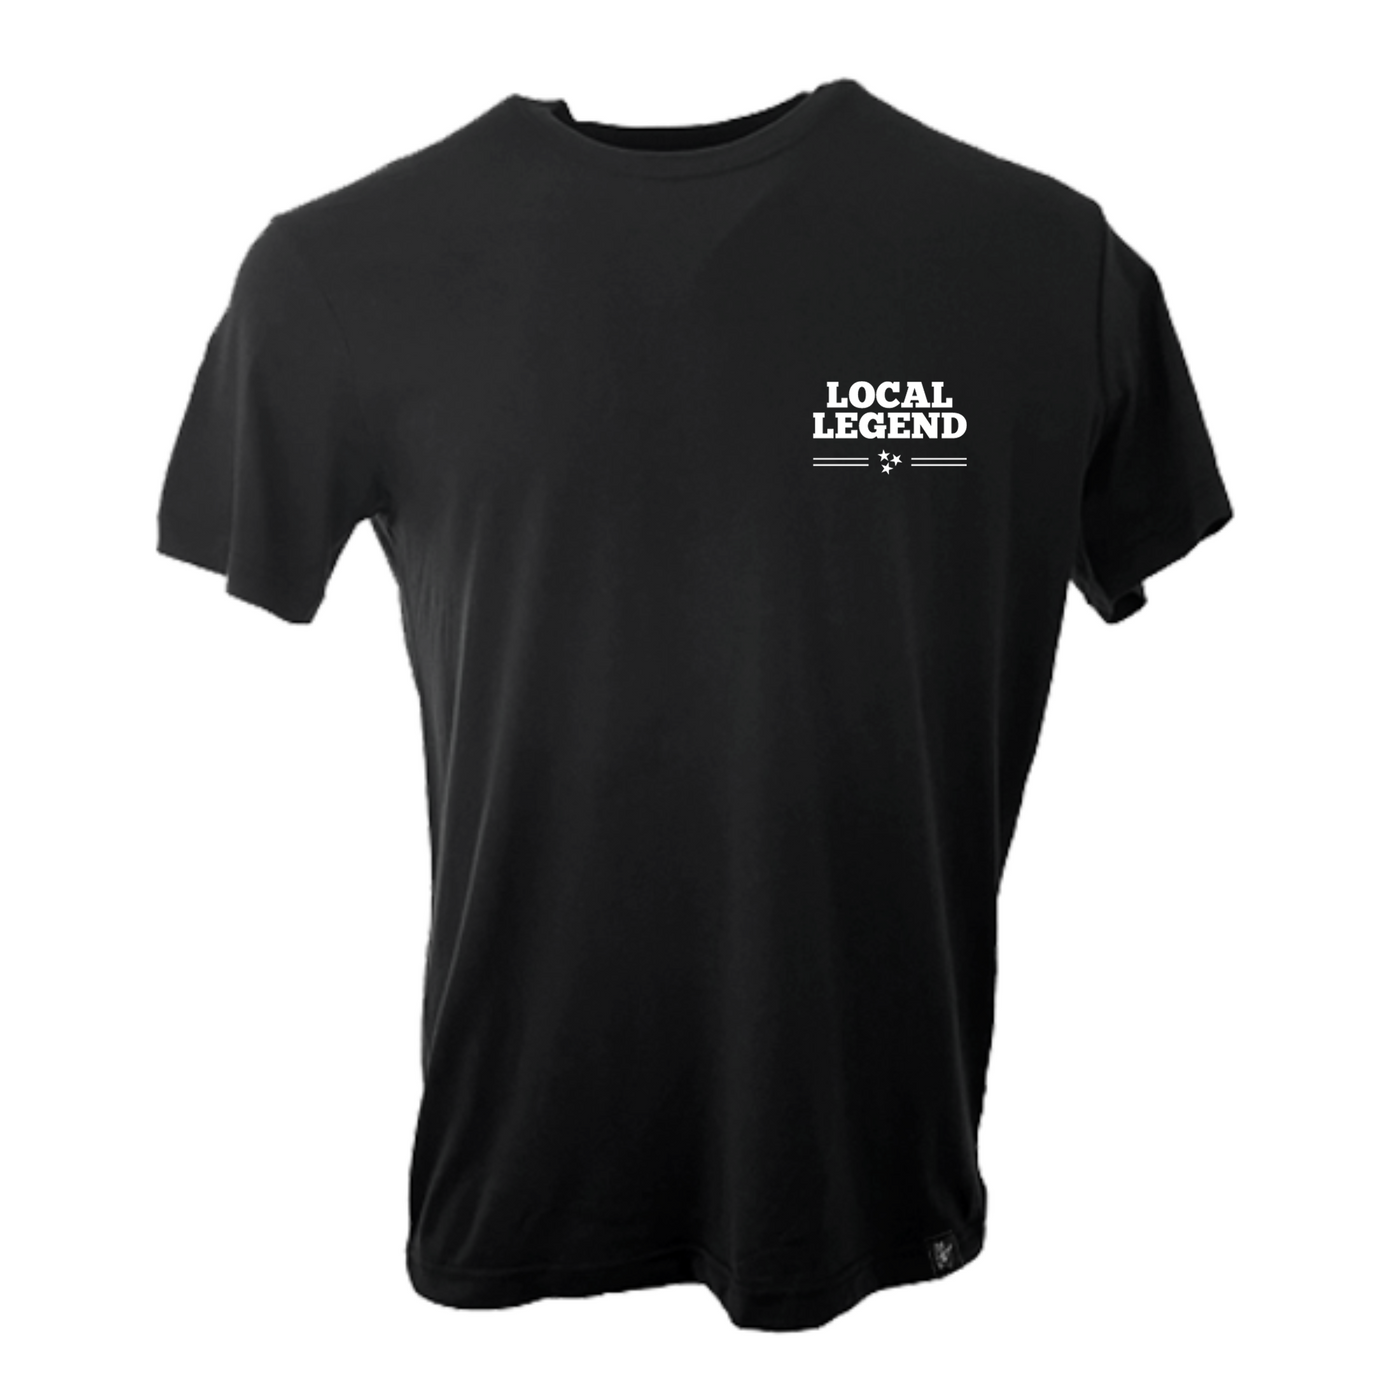 THE 615 HOUSE - Local Legend T-Shirt: Solid Black